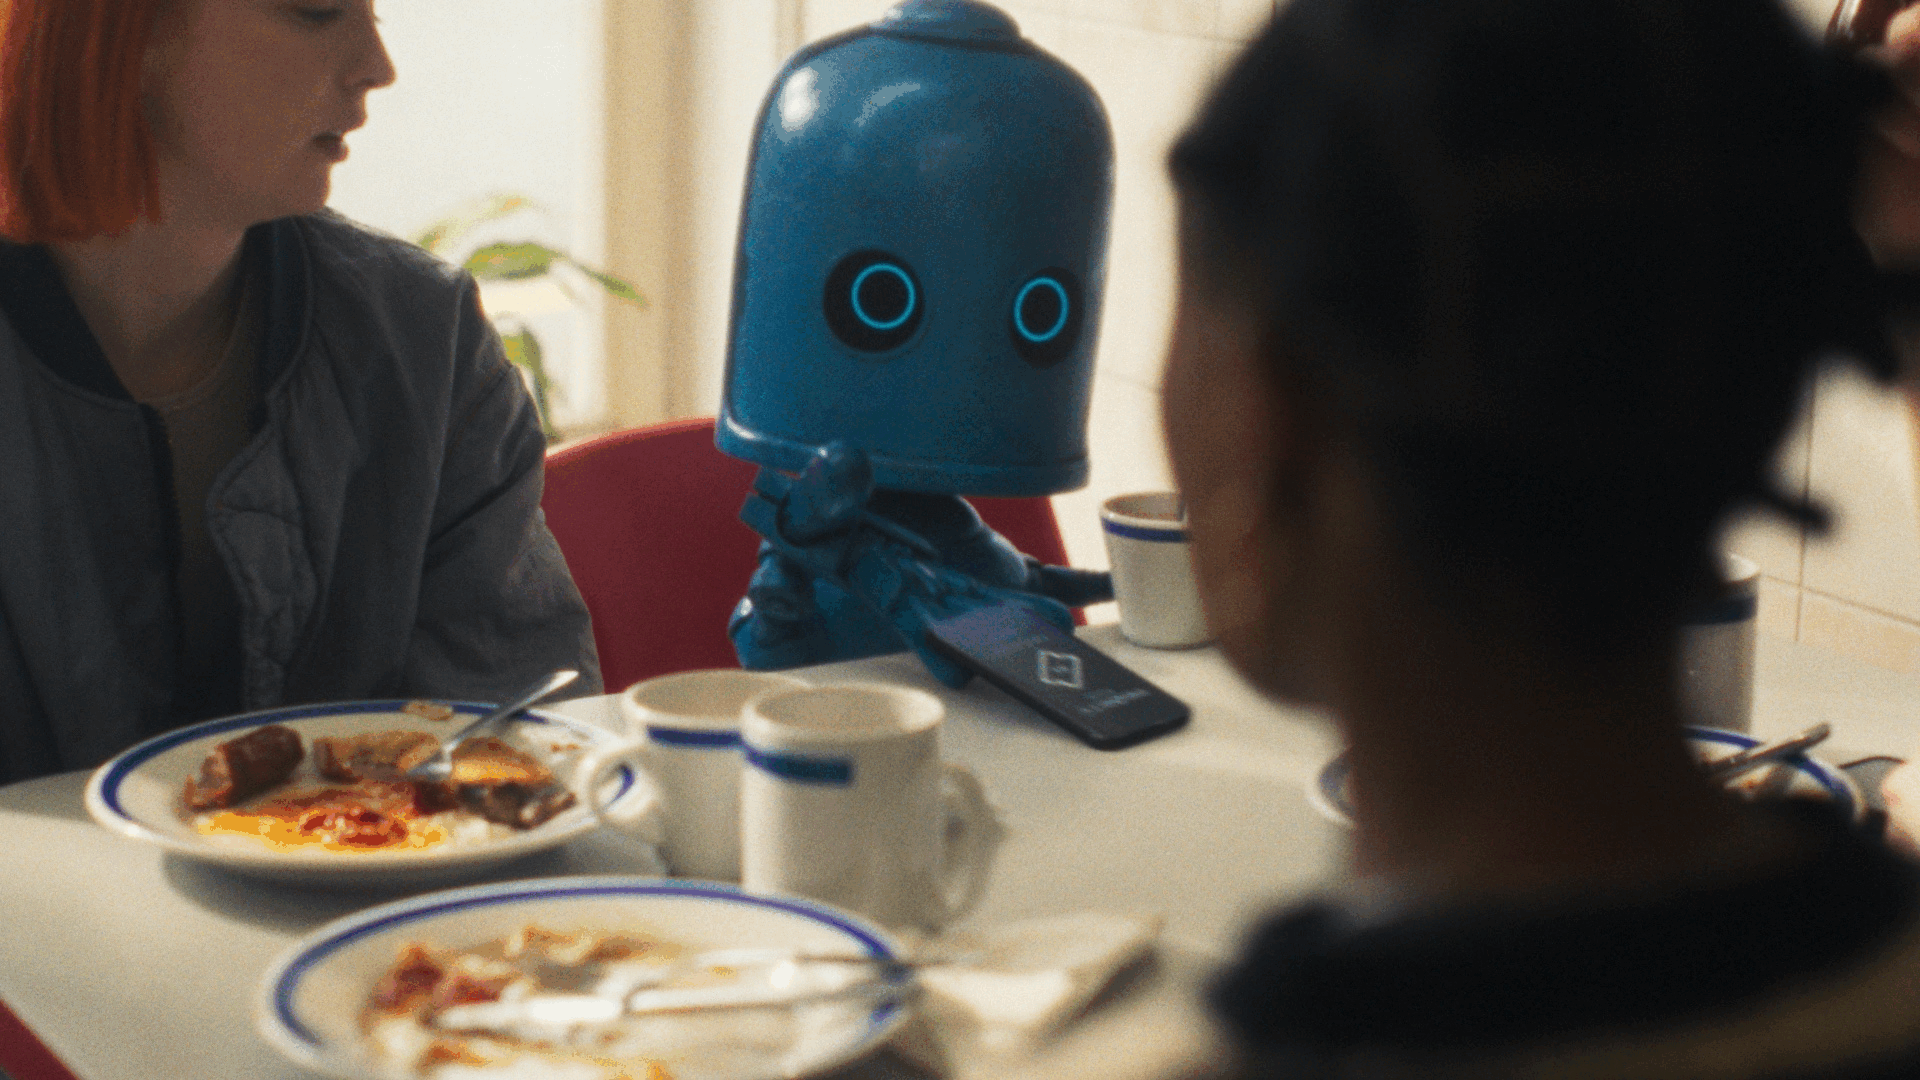 WATCH: O2 launches new ad highlighting customer perks